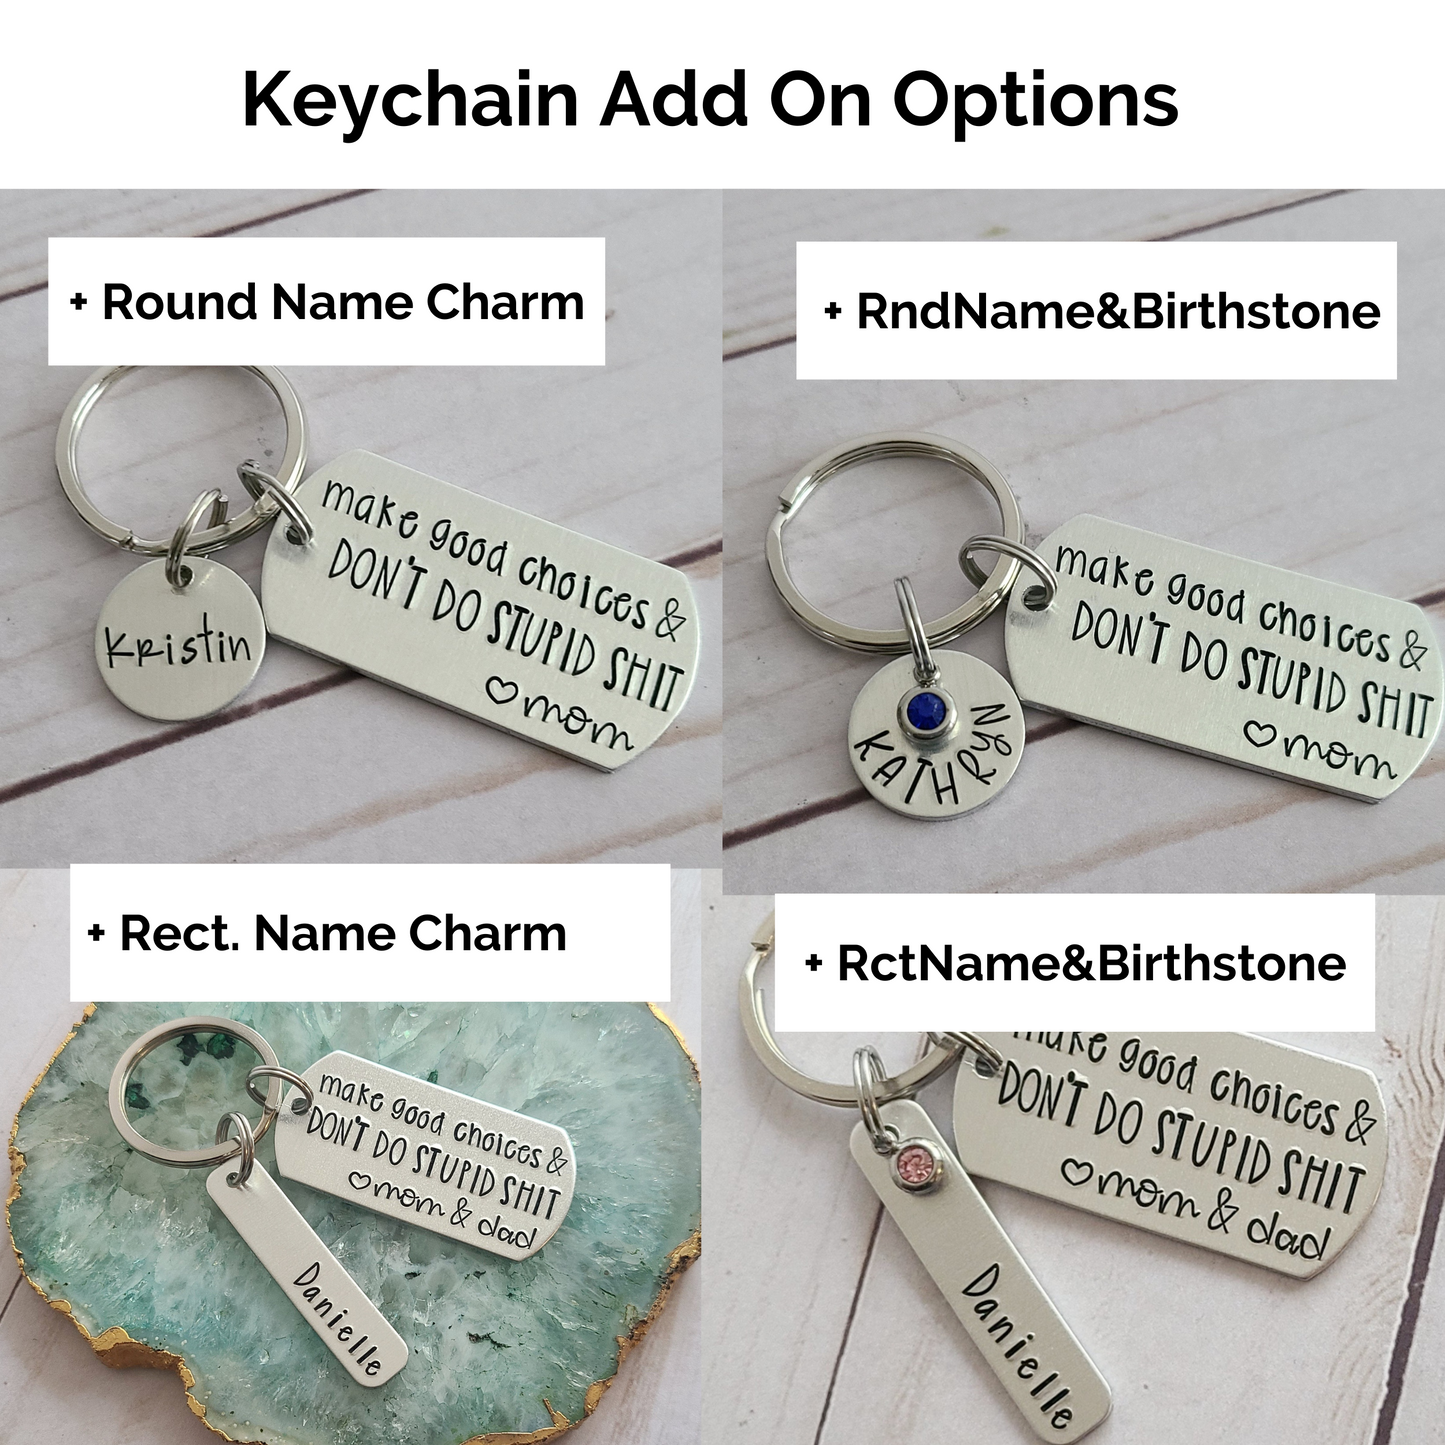 Make Good Choices & Don't Do Stupid Shit Love Mom & Dad Keychain - Cute Personalized Accessories for Teens